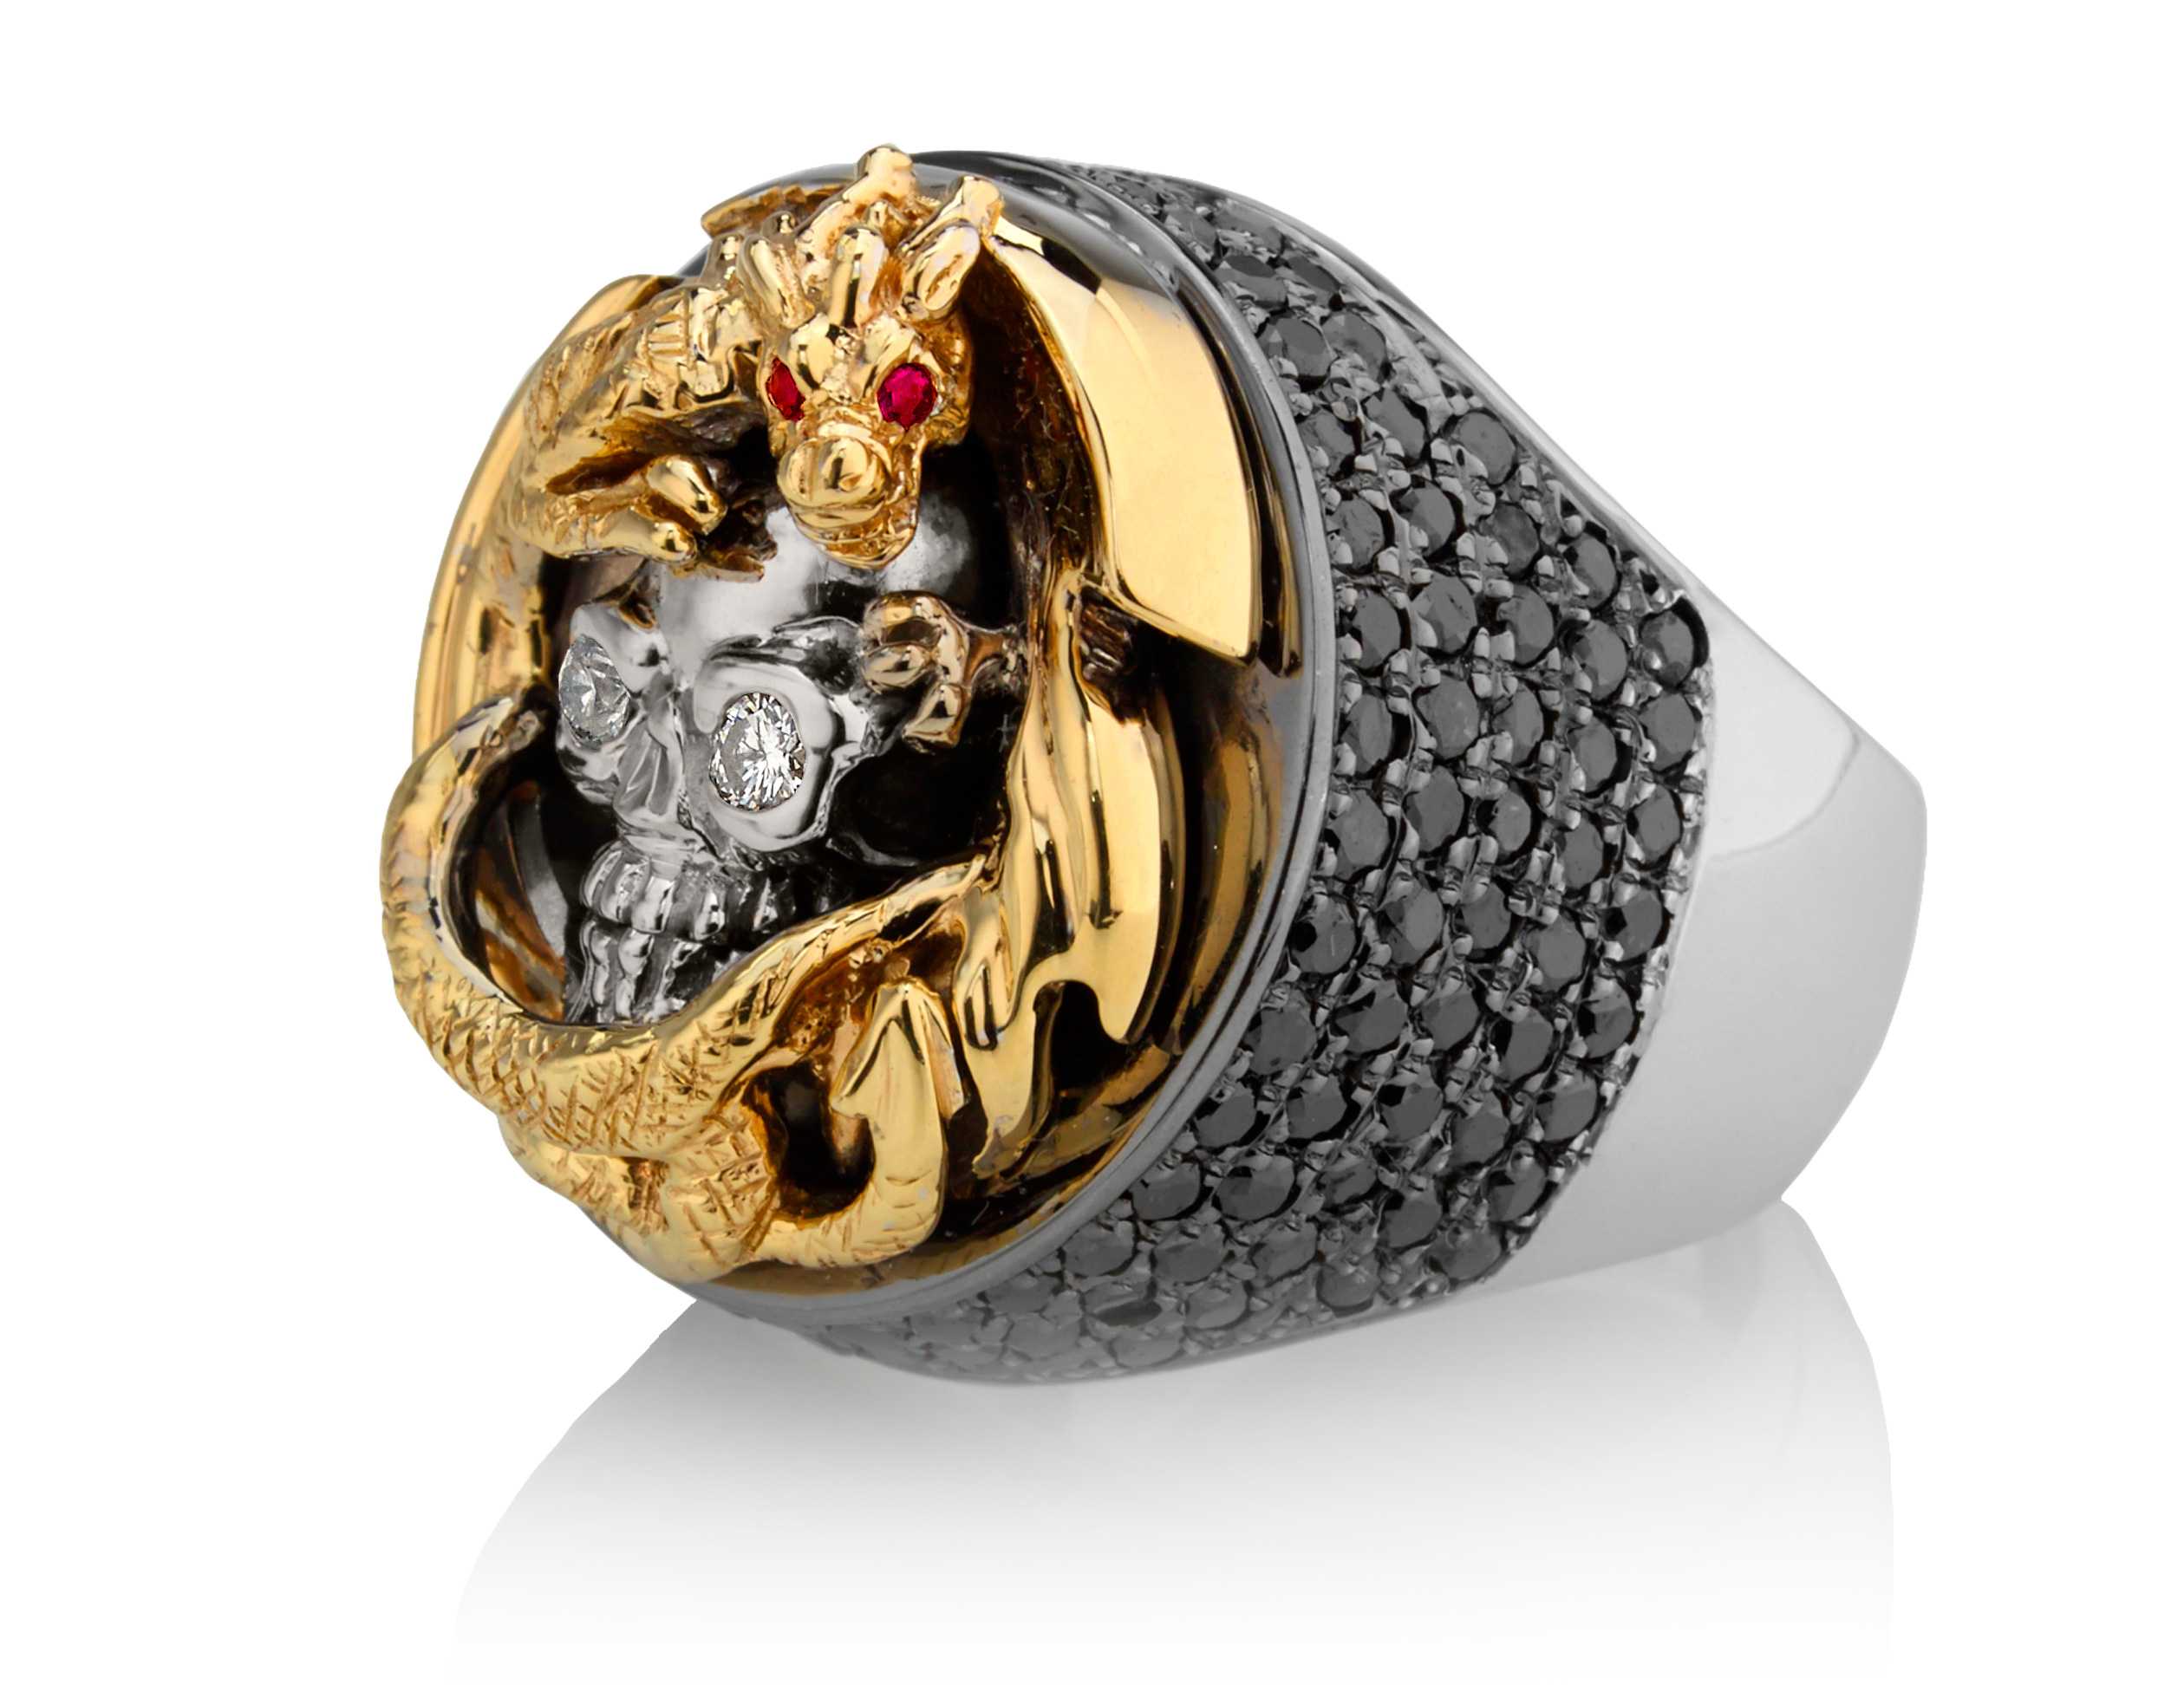 ... Ring (Left Side View) in Yellow Gold with White & Black Diamonds & Red